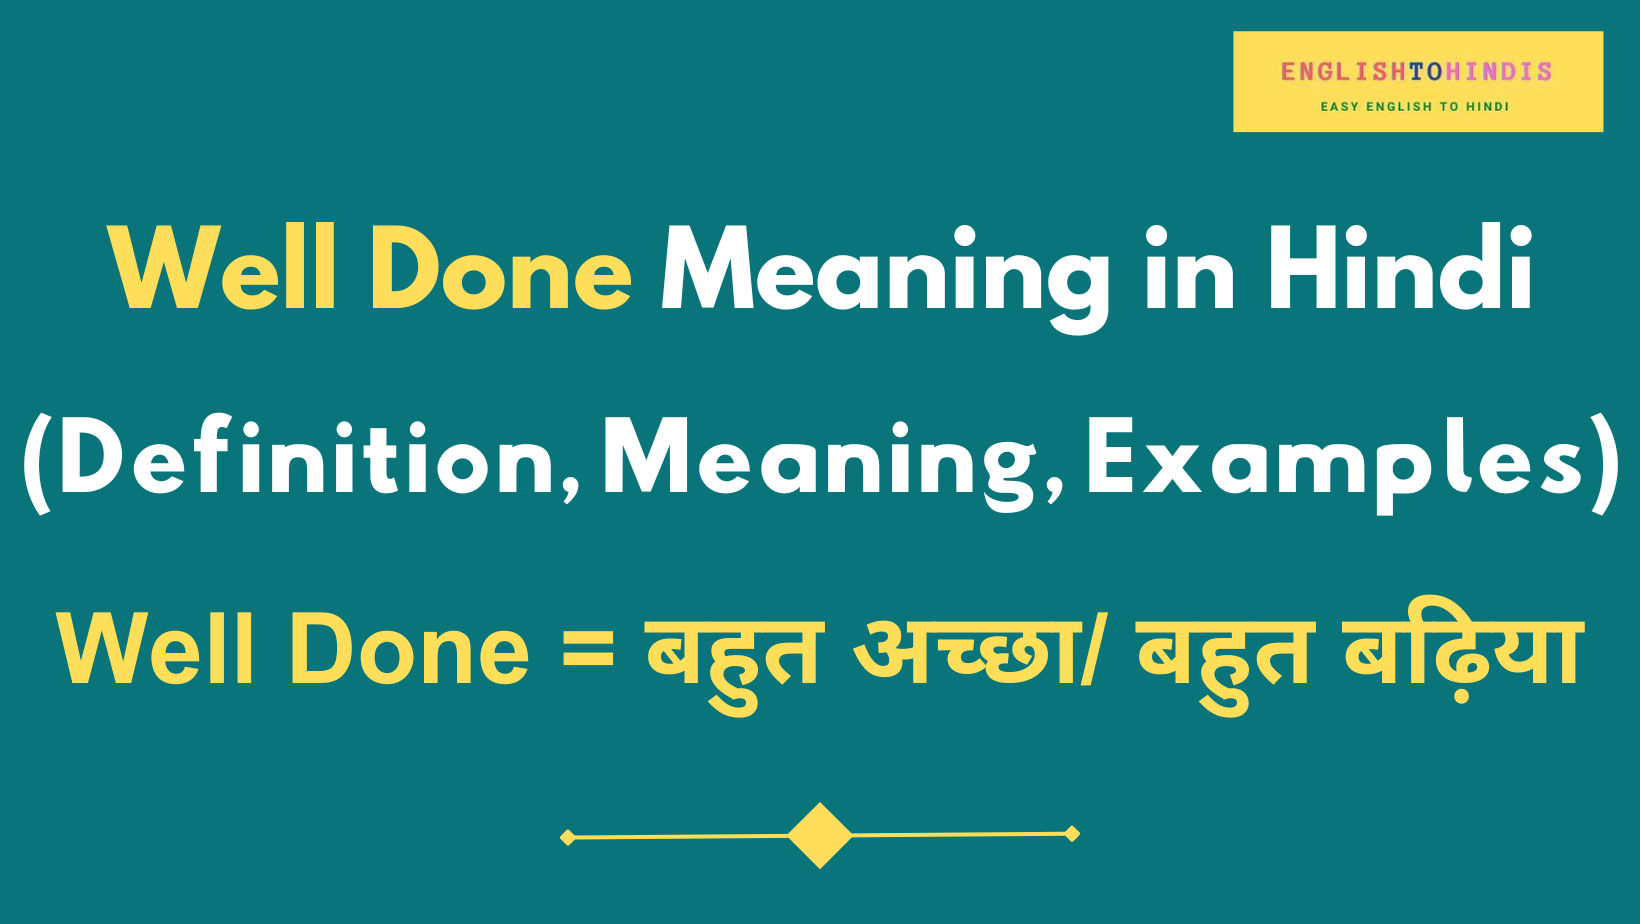 Well Done Meaning in Hindi